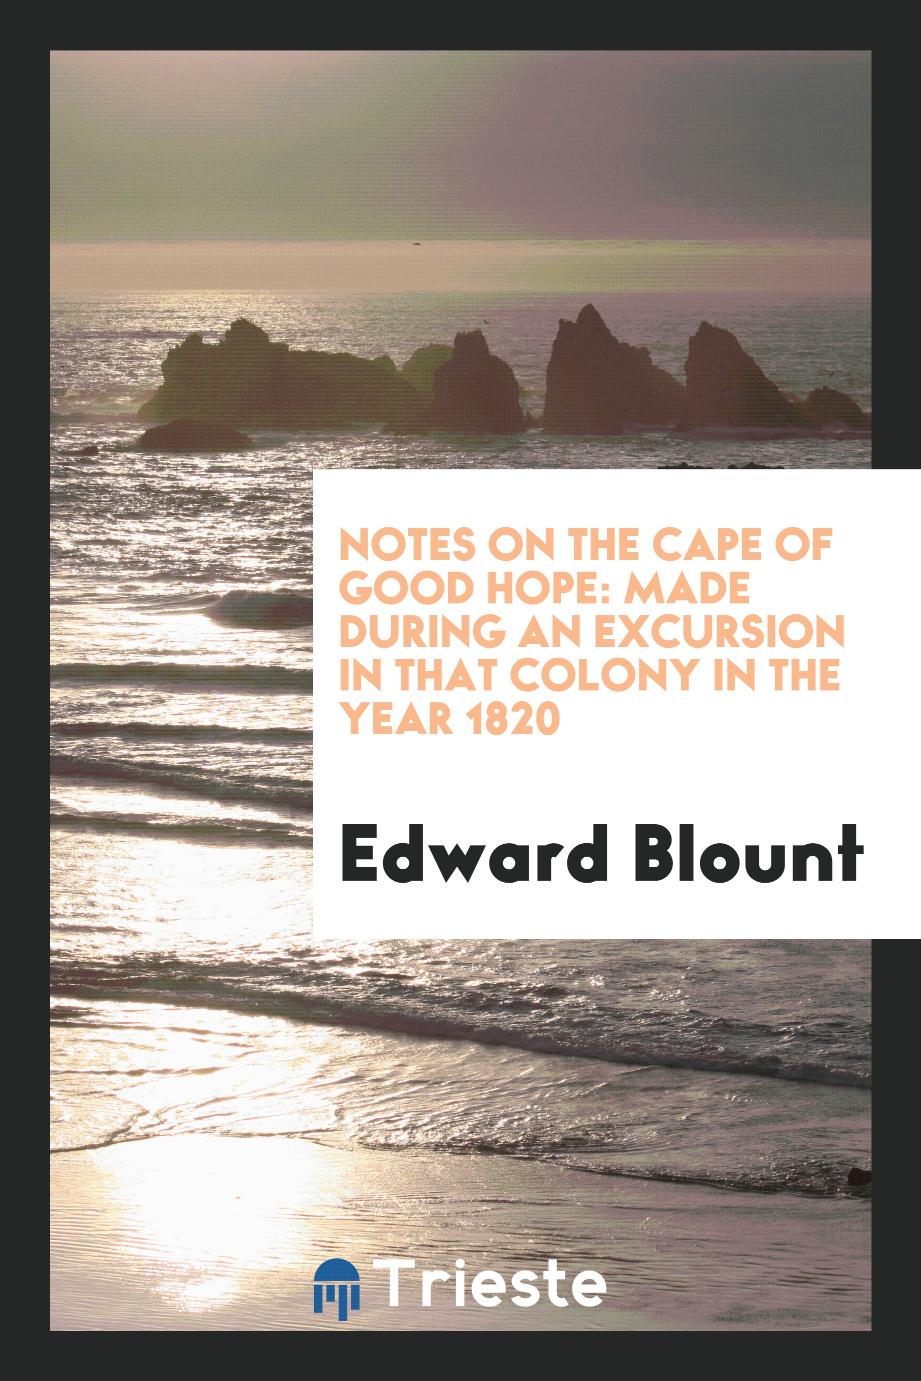 Notes on the Cape of Good Hope: Made During an Excursion in That Colony in the Year 1820